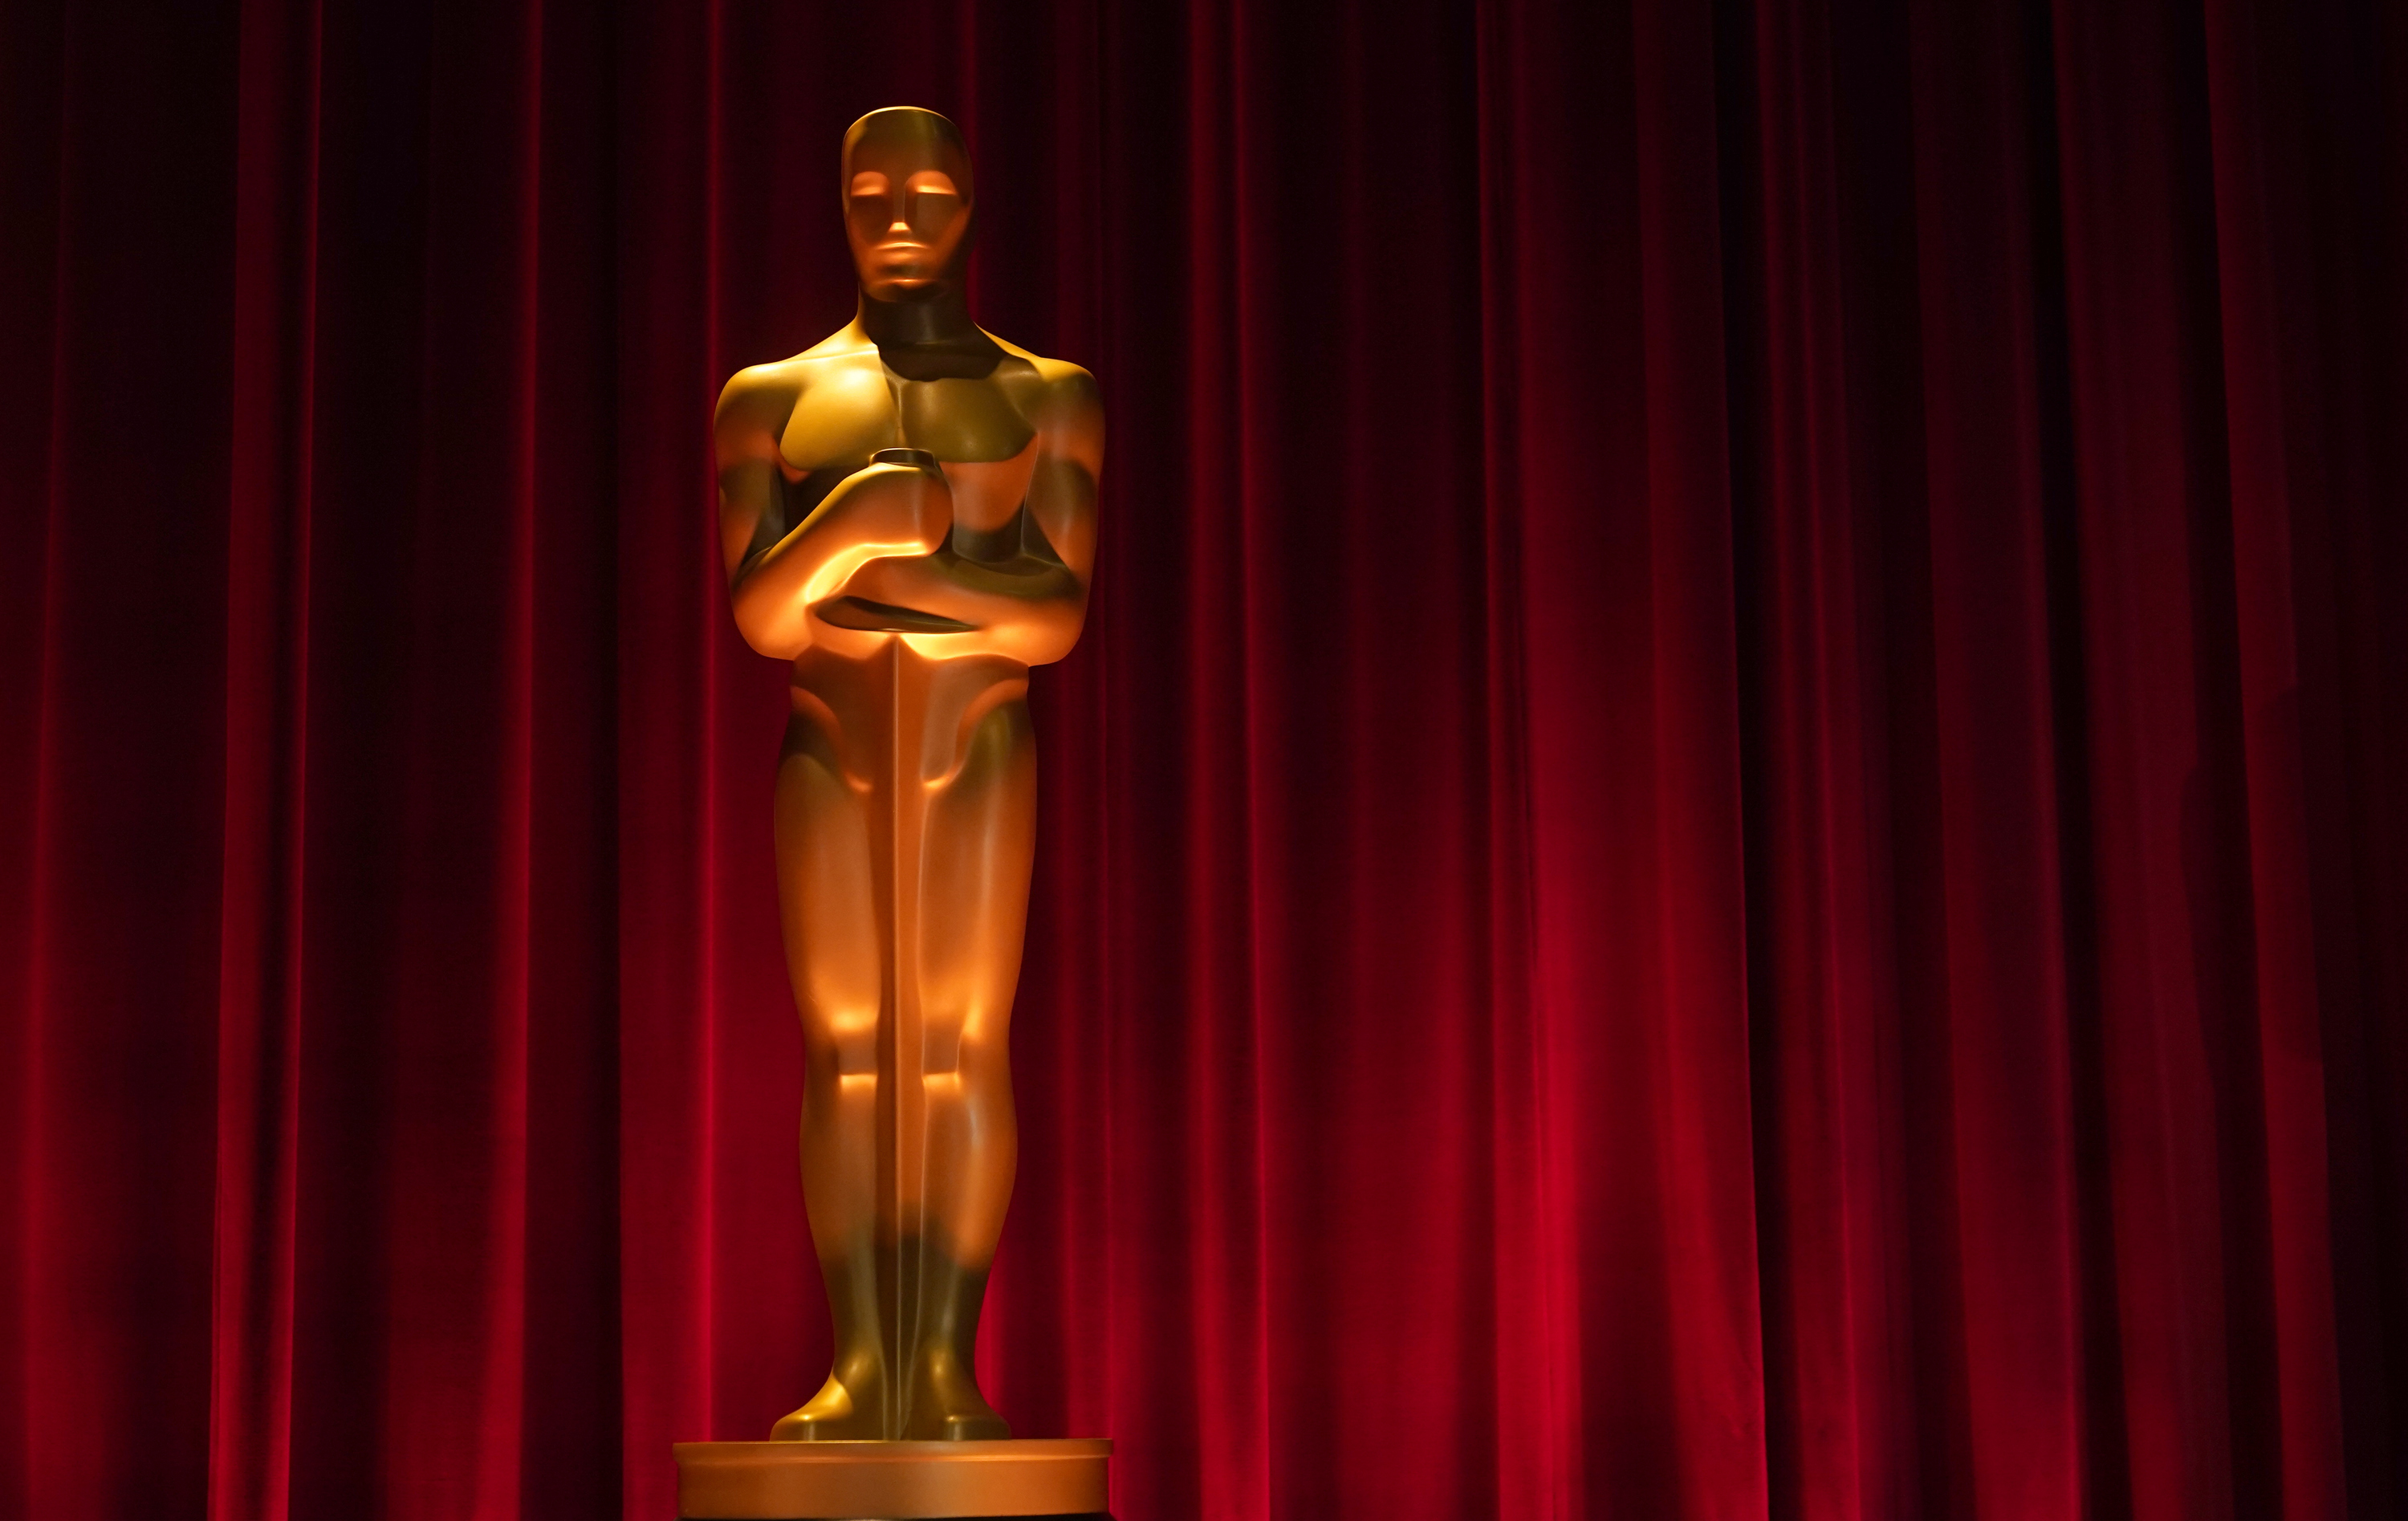 How to Watch the 2021 Oscars - Oscars Host, Start Time, Performers, Nominees